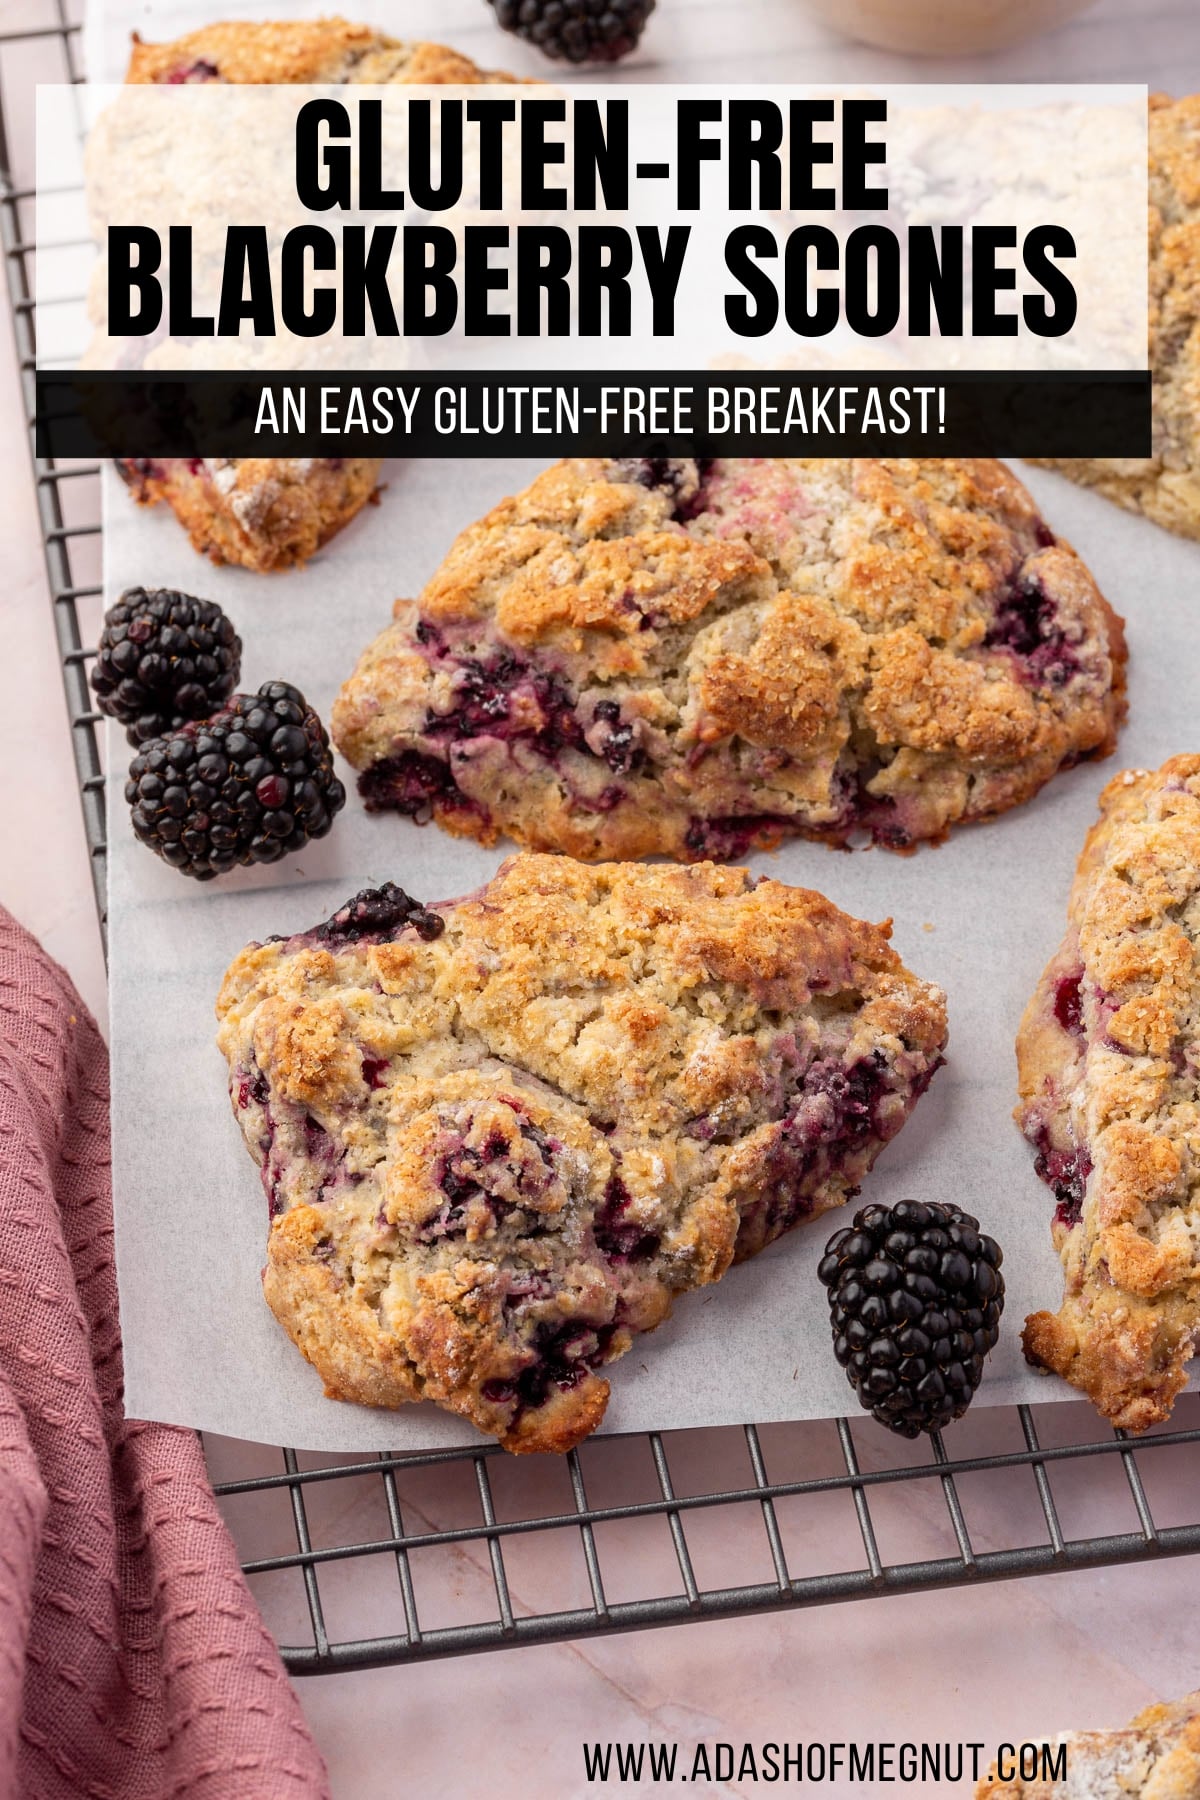 A gluten free blackberry scone cooling on a wire cooling rack with fresh blackberries and more scones surrounding it.